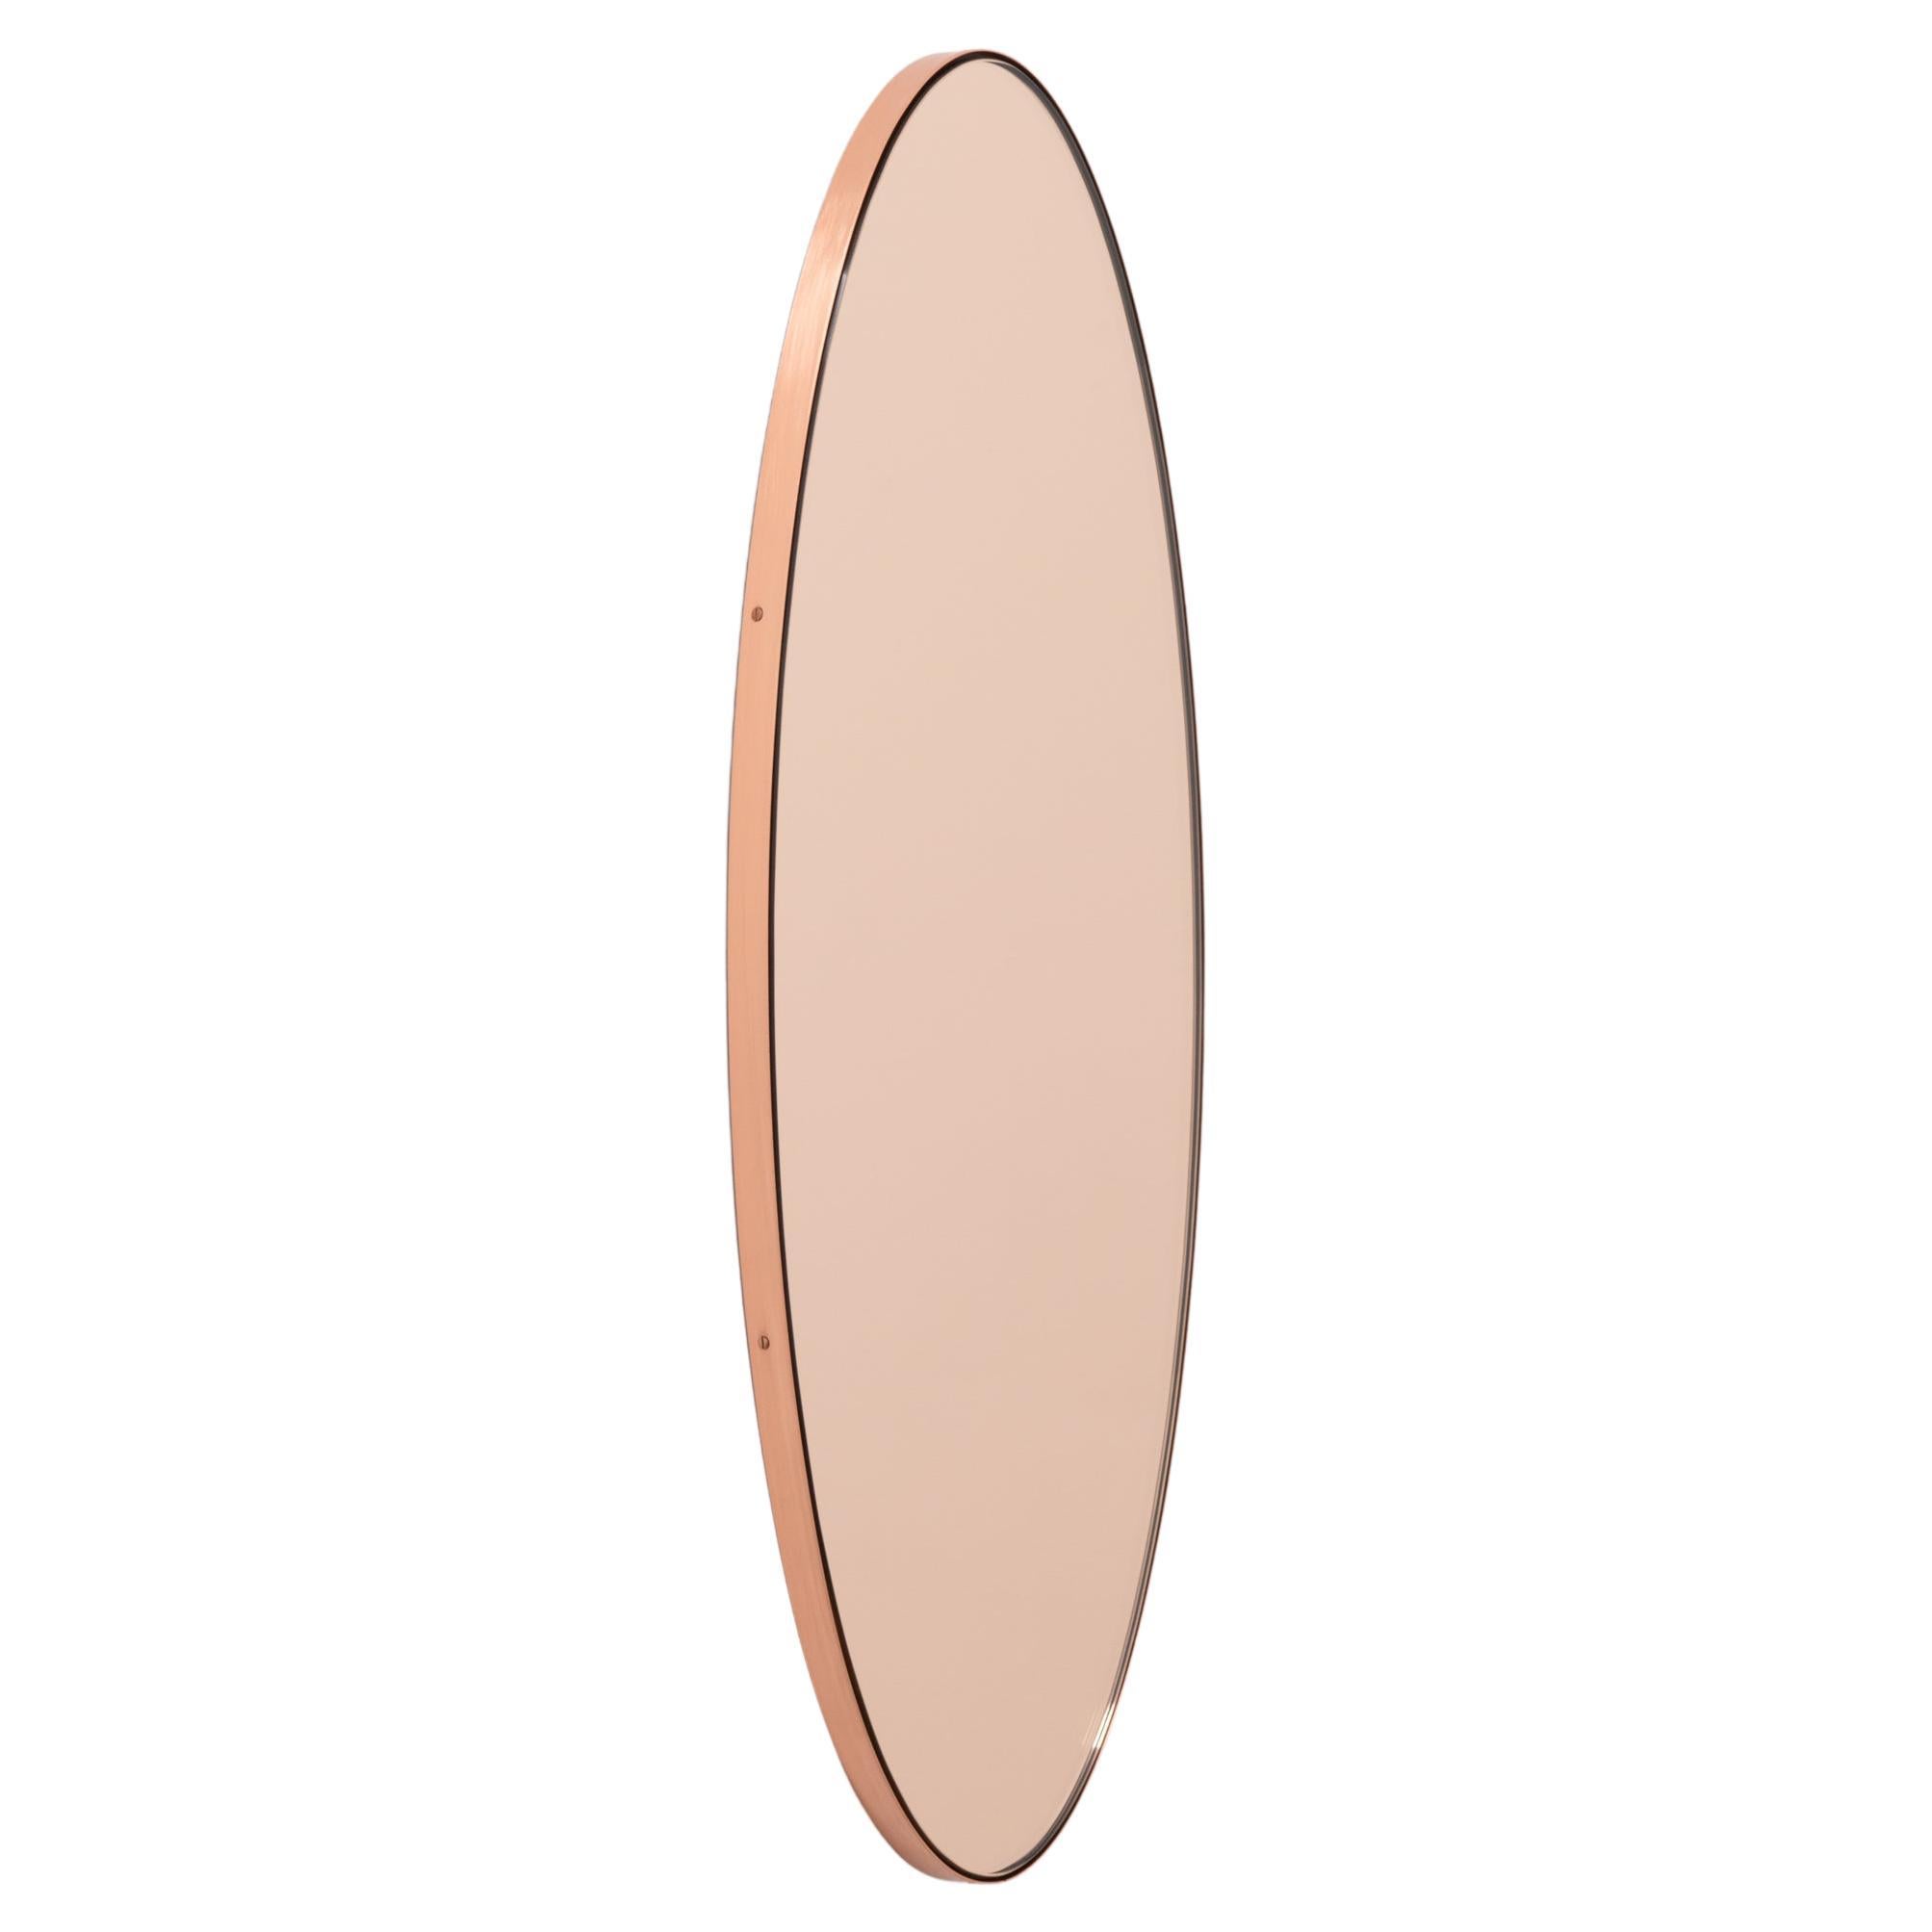 Ovalis Oval Peach Rose Gold Handcrafted Mirror with Copper Frame, Large For Sale